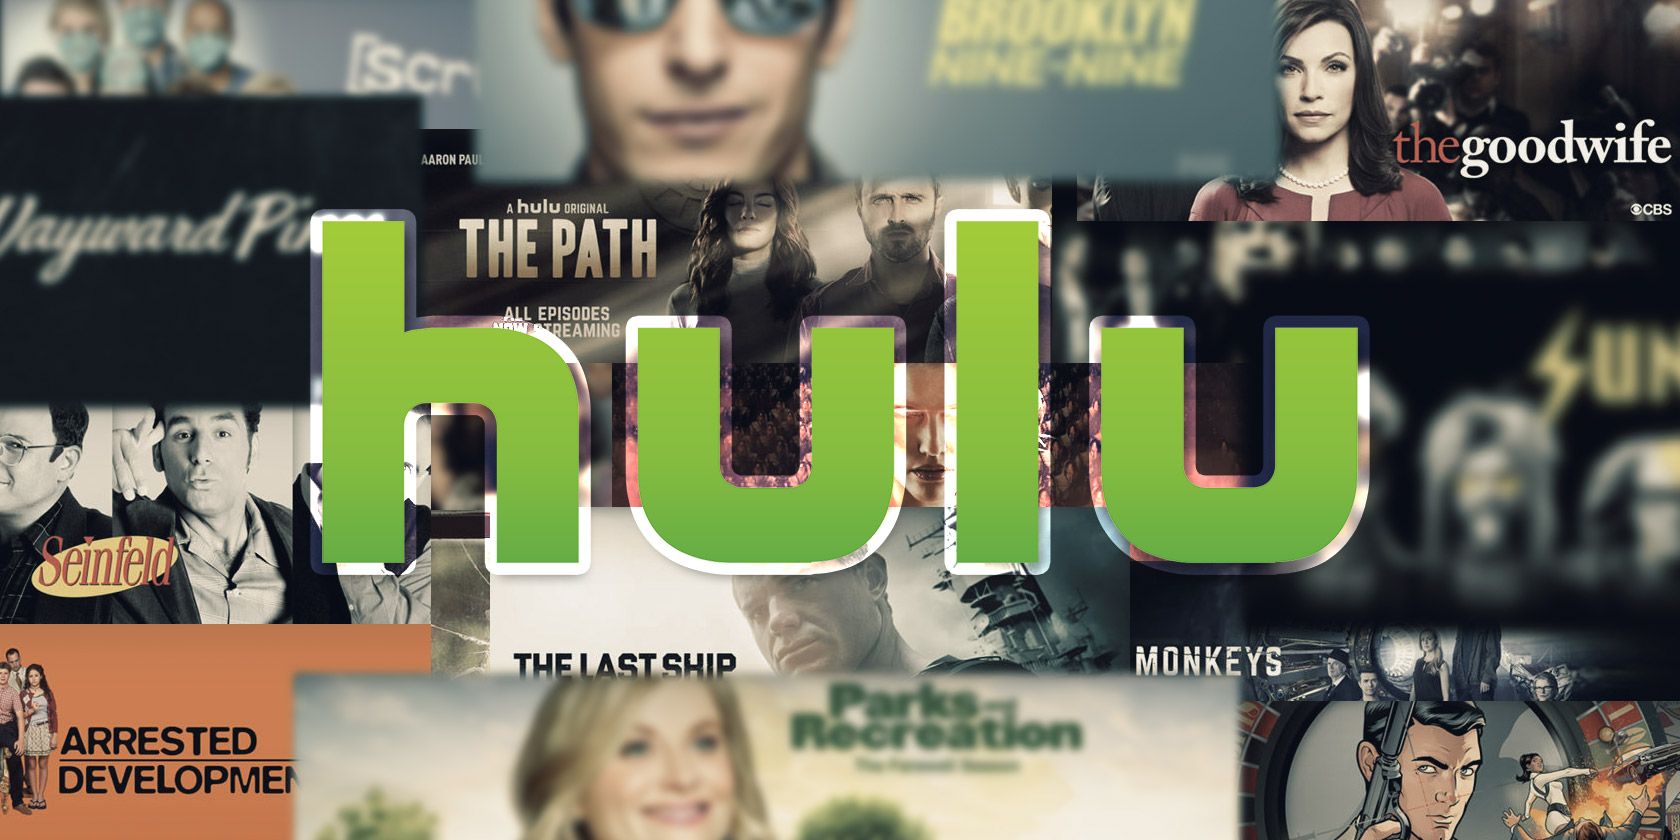 16 Unmissable TV Shows You Should Watch on Hulu Right Now